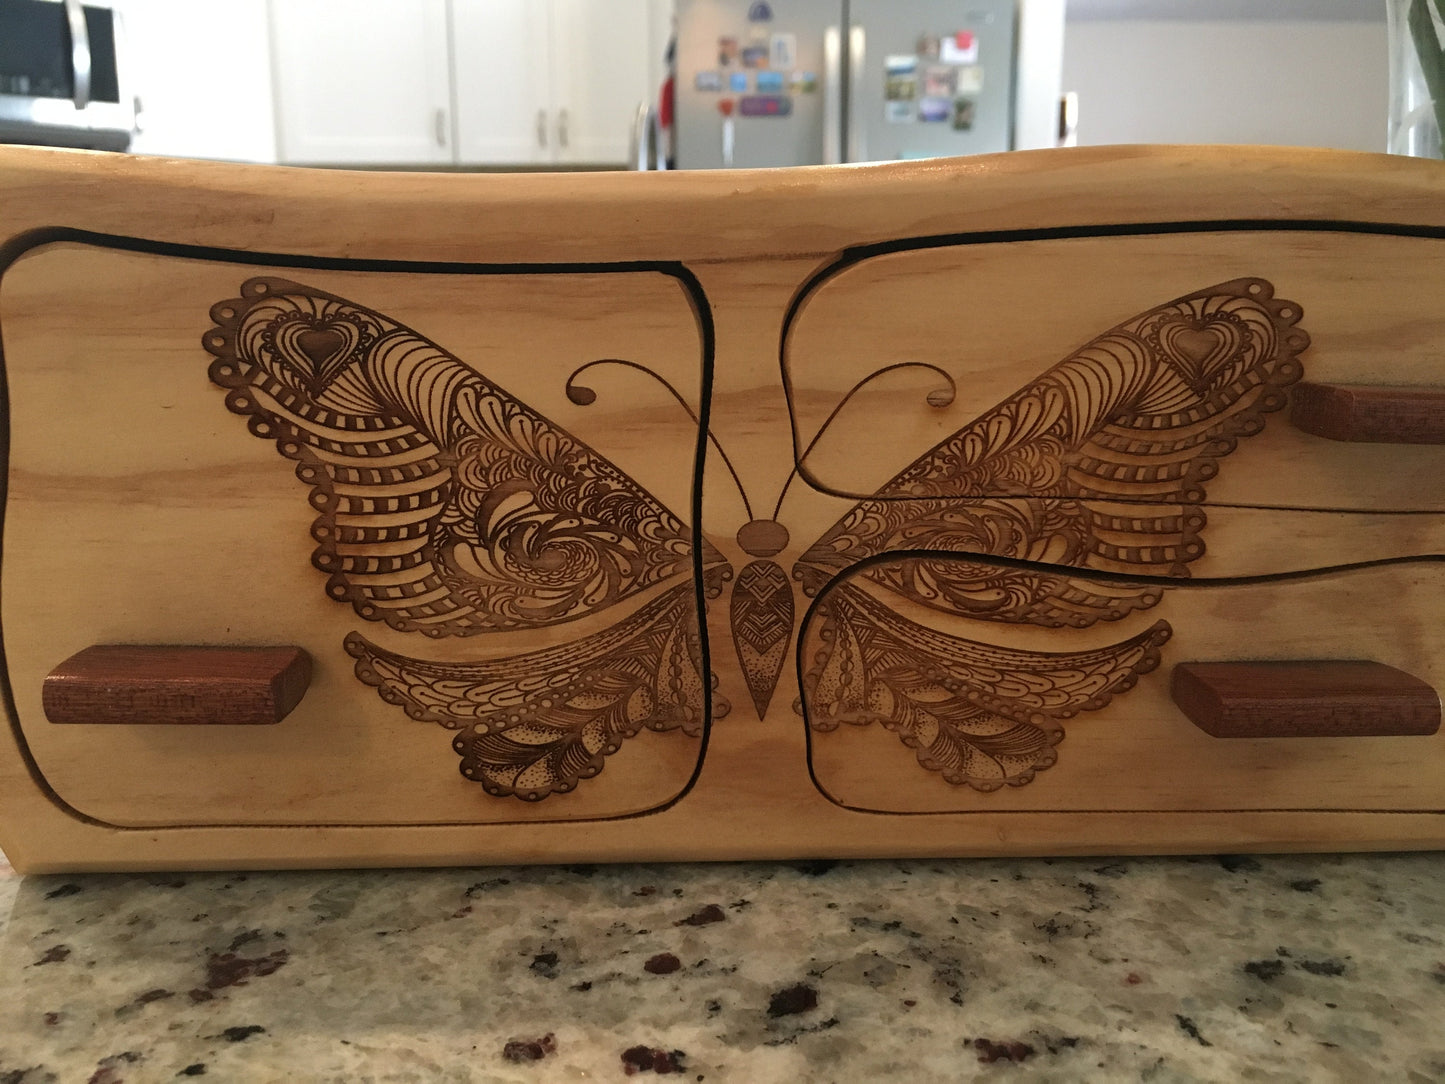 Solid Wood Box W/Drawers - Butterfly, Jewelry Box, Handcrafted, Custom Box, Personalized Box, Handmade, Box, Home Decor, Engraved, Stash Box